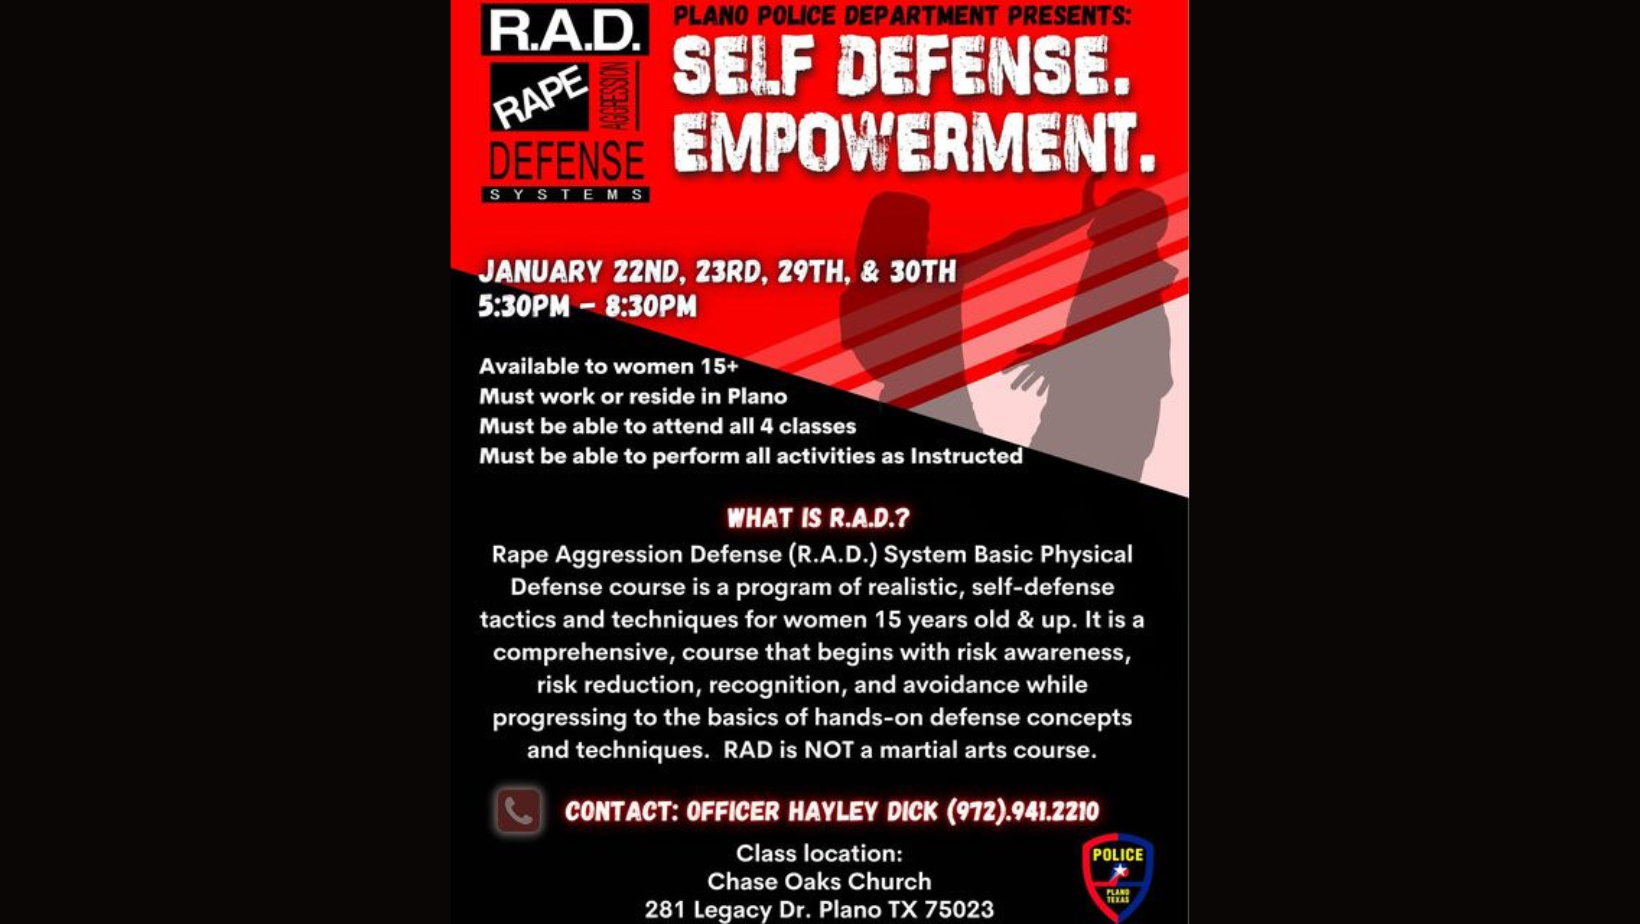 Free self-defense class offered to Fort Smith residents